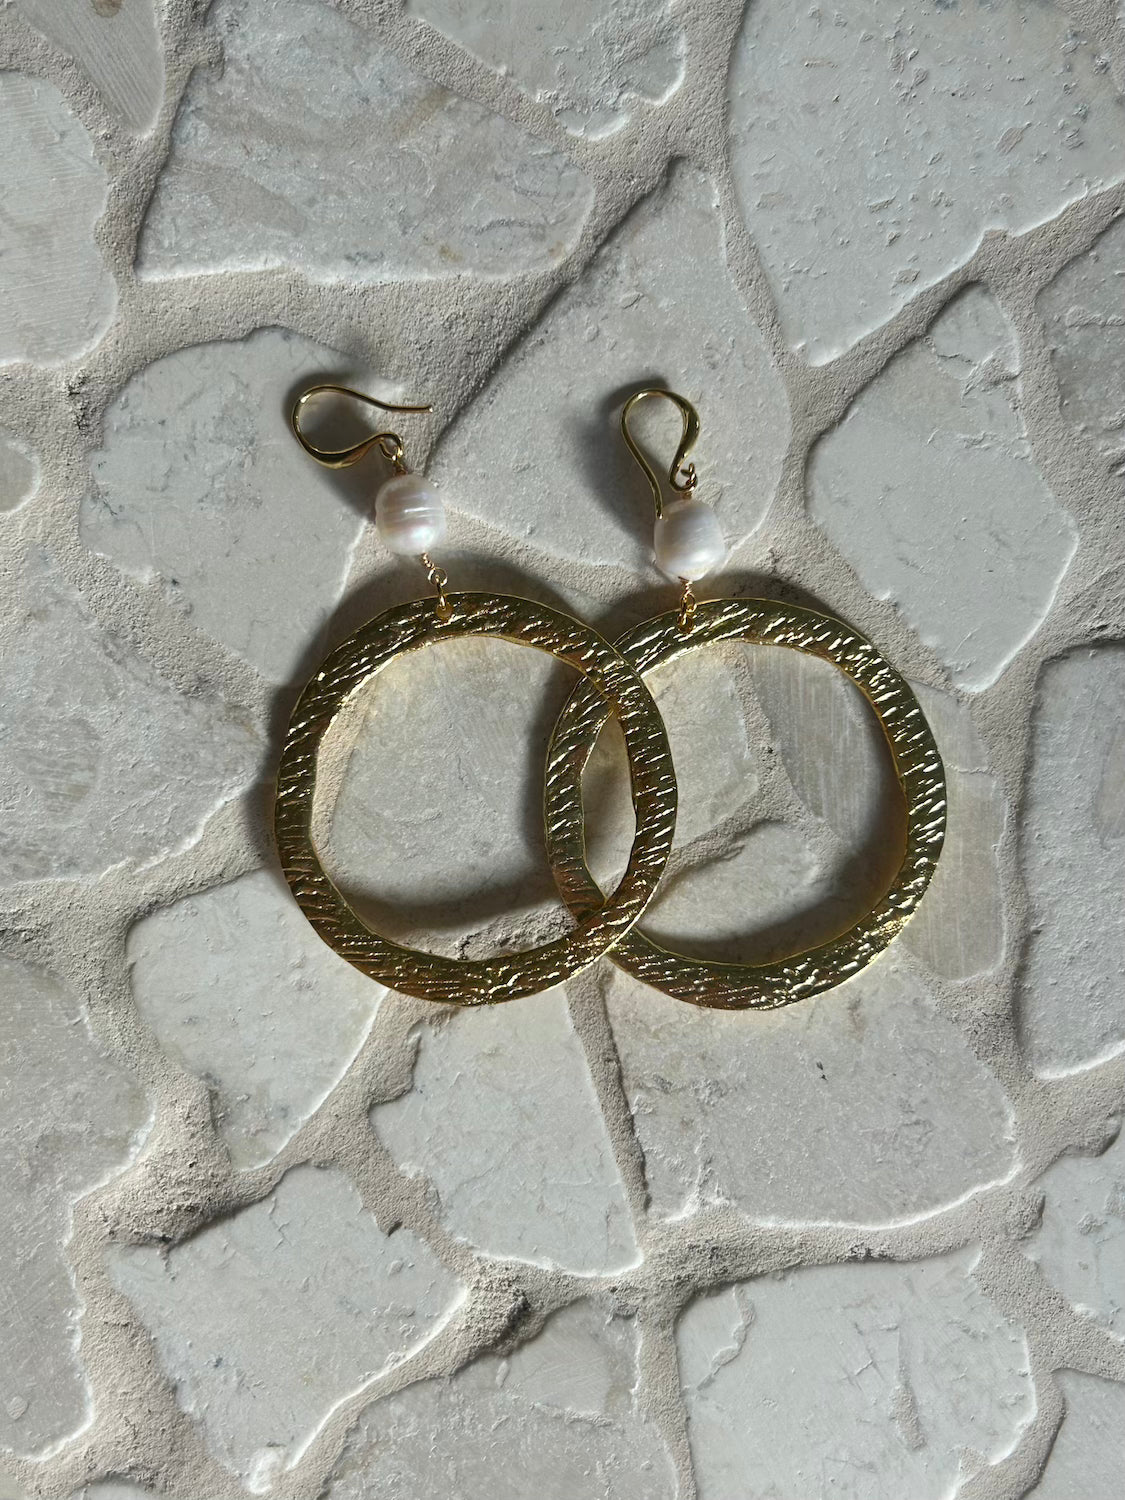 Golden Hour Hoops - large circle tampered shape earrings with pearl droplets -Unique jewellery